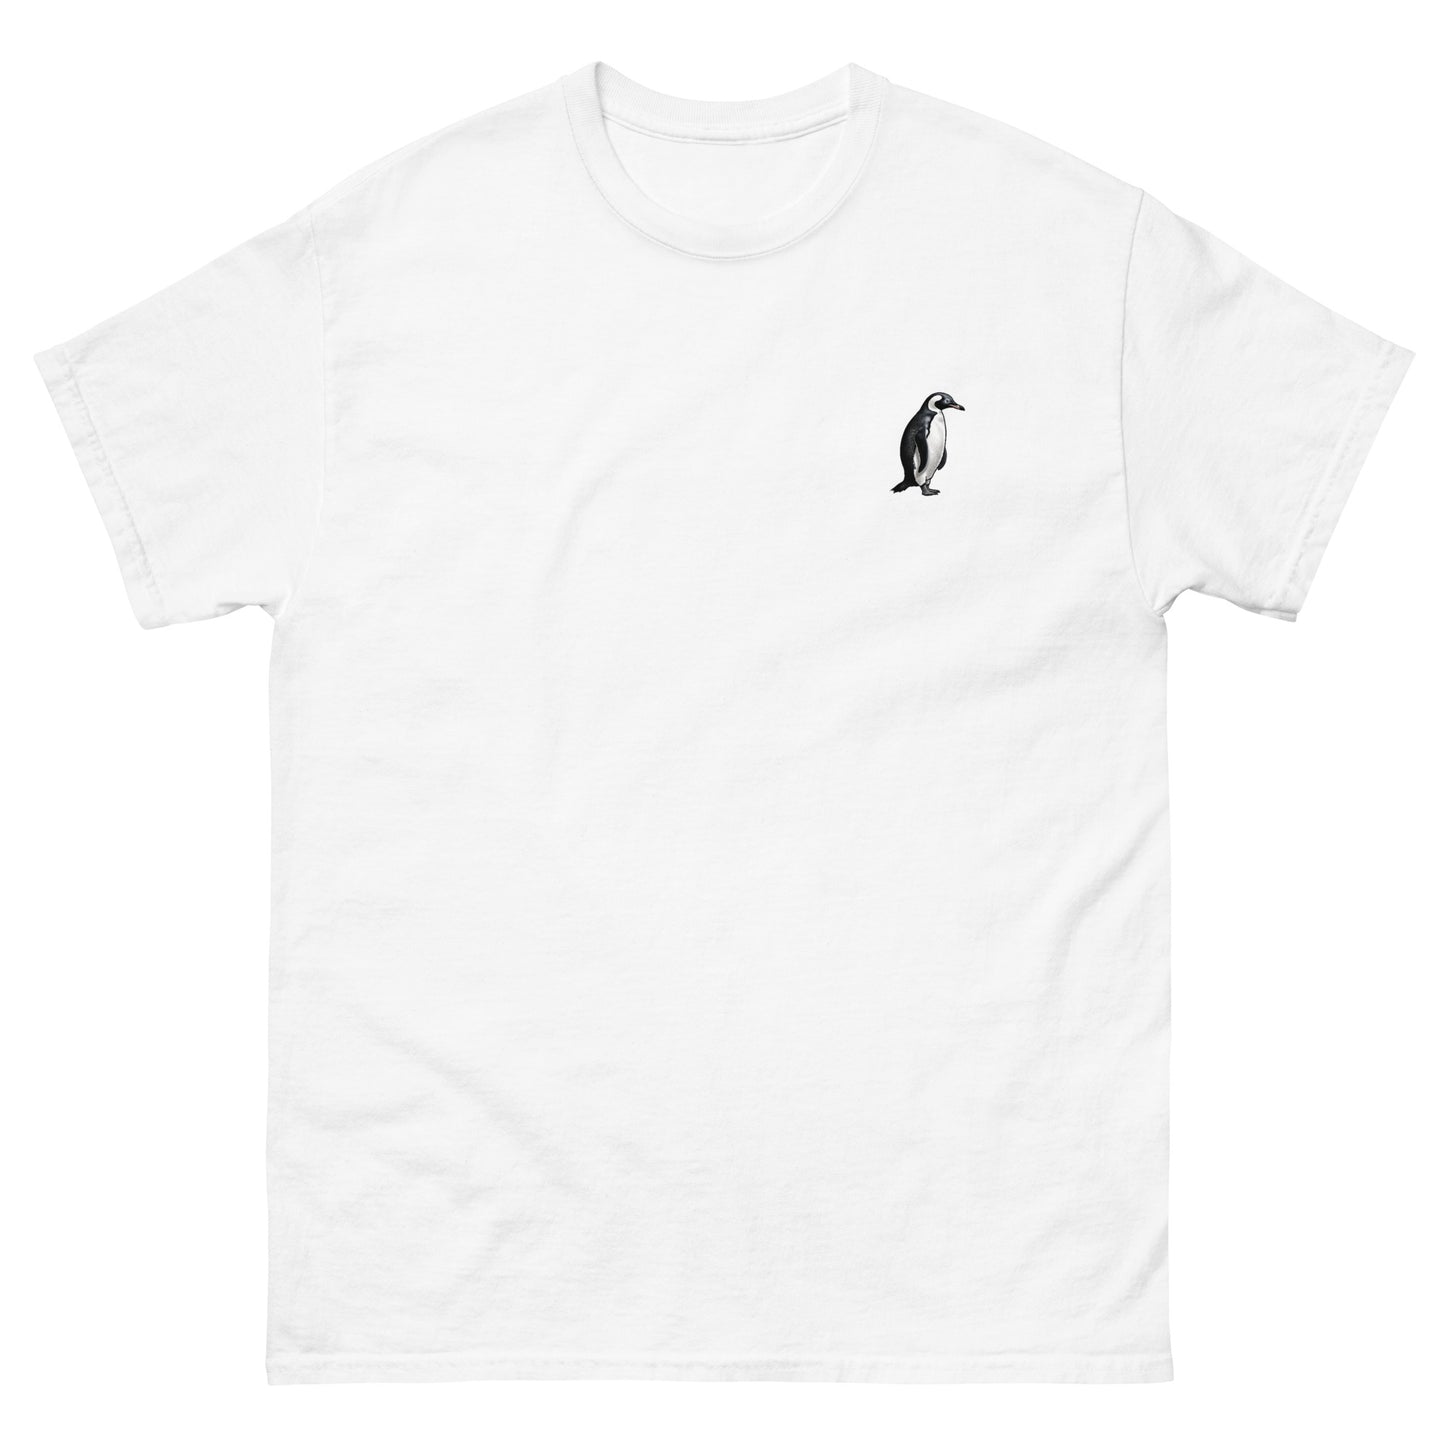 White High Quality Tee - Front Design with a Penguin on left chest - Back Design with a Penguin and a Phrase "Penguins:always dressed to impress, walking on ice like a boss" print